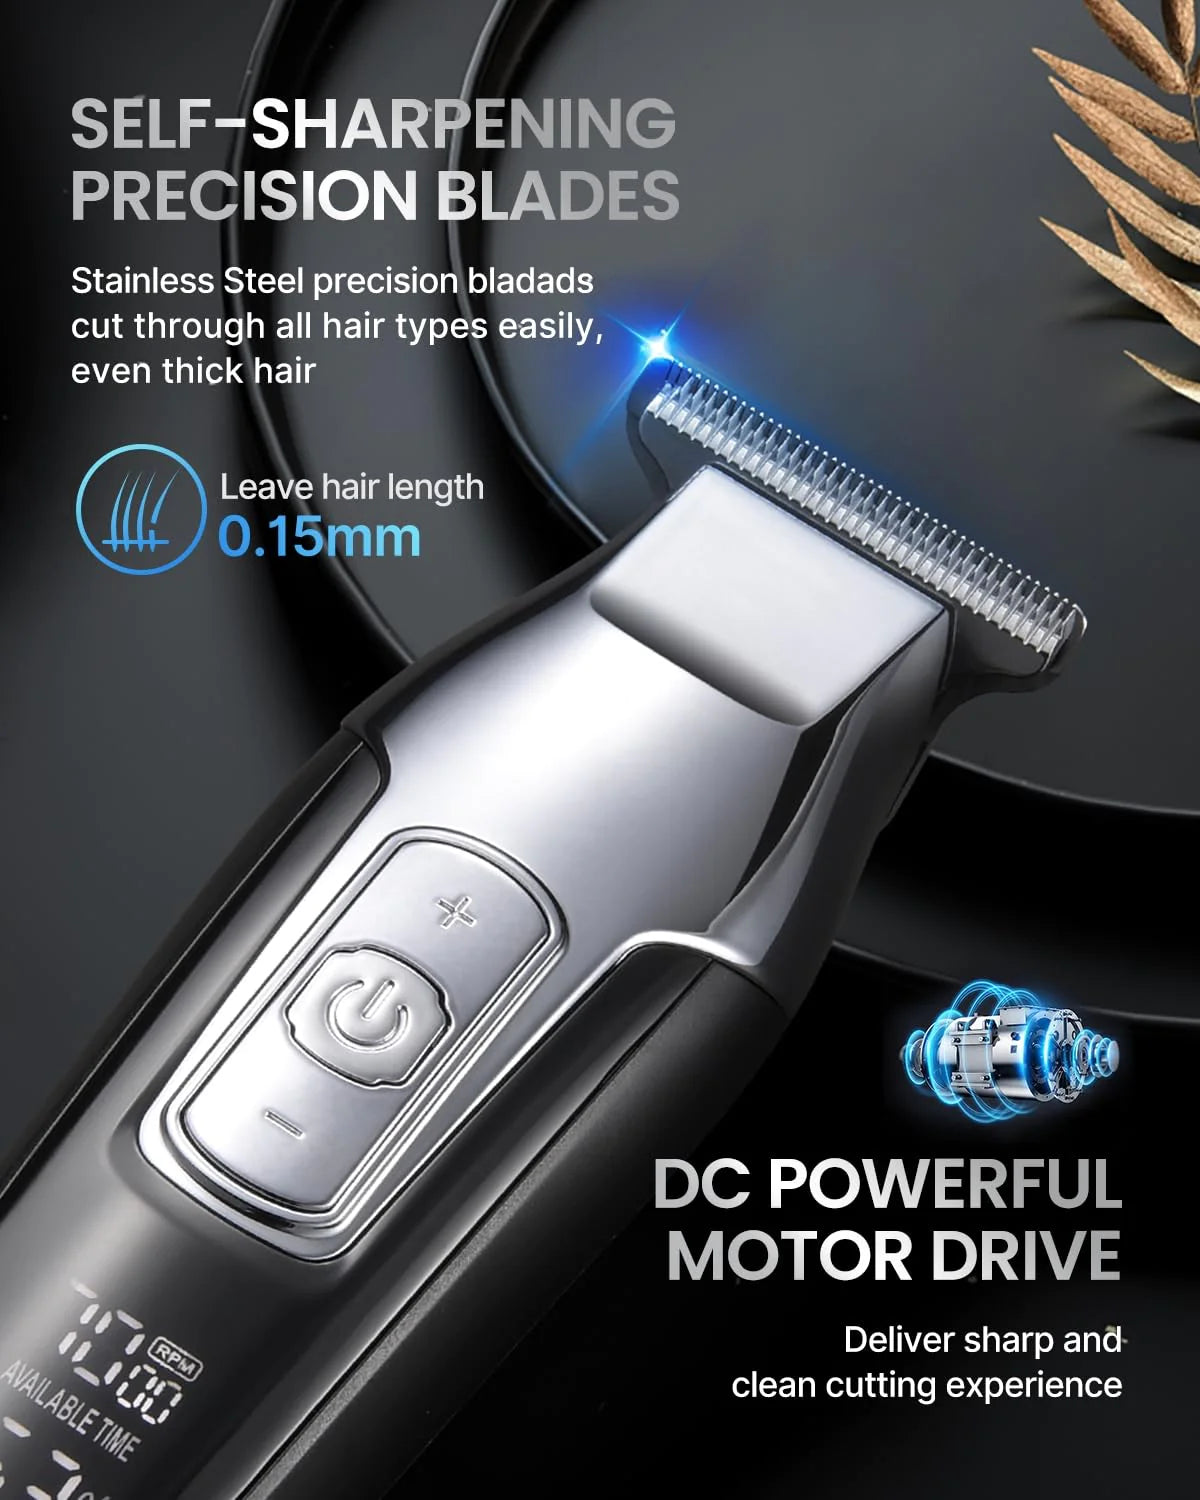 Close-up of a sleek, metallic Renpho EU Professional Cordless Hair Trimmer emphasizing its precision blades and digital features. The text highlights its "self-sharpening precision blades" and "DC powerful drive" for effective cutting.